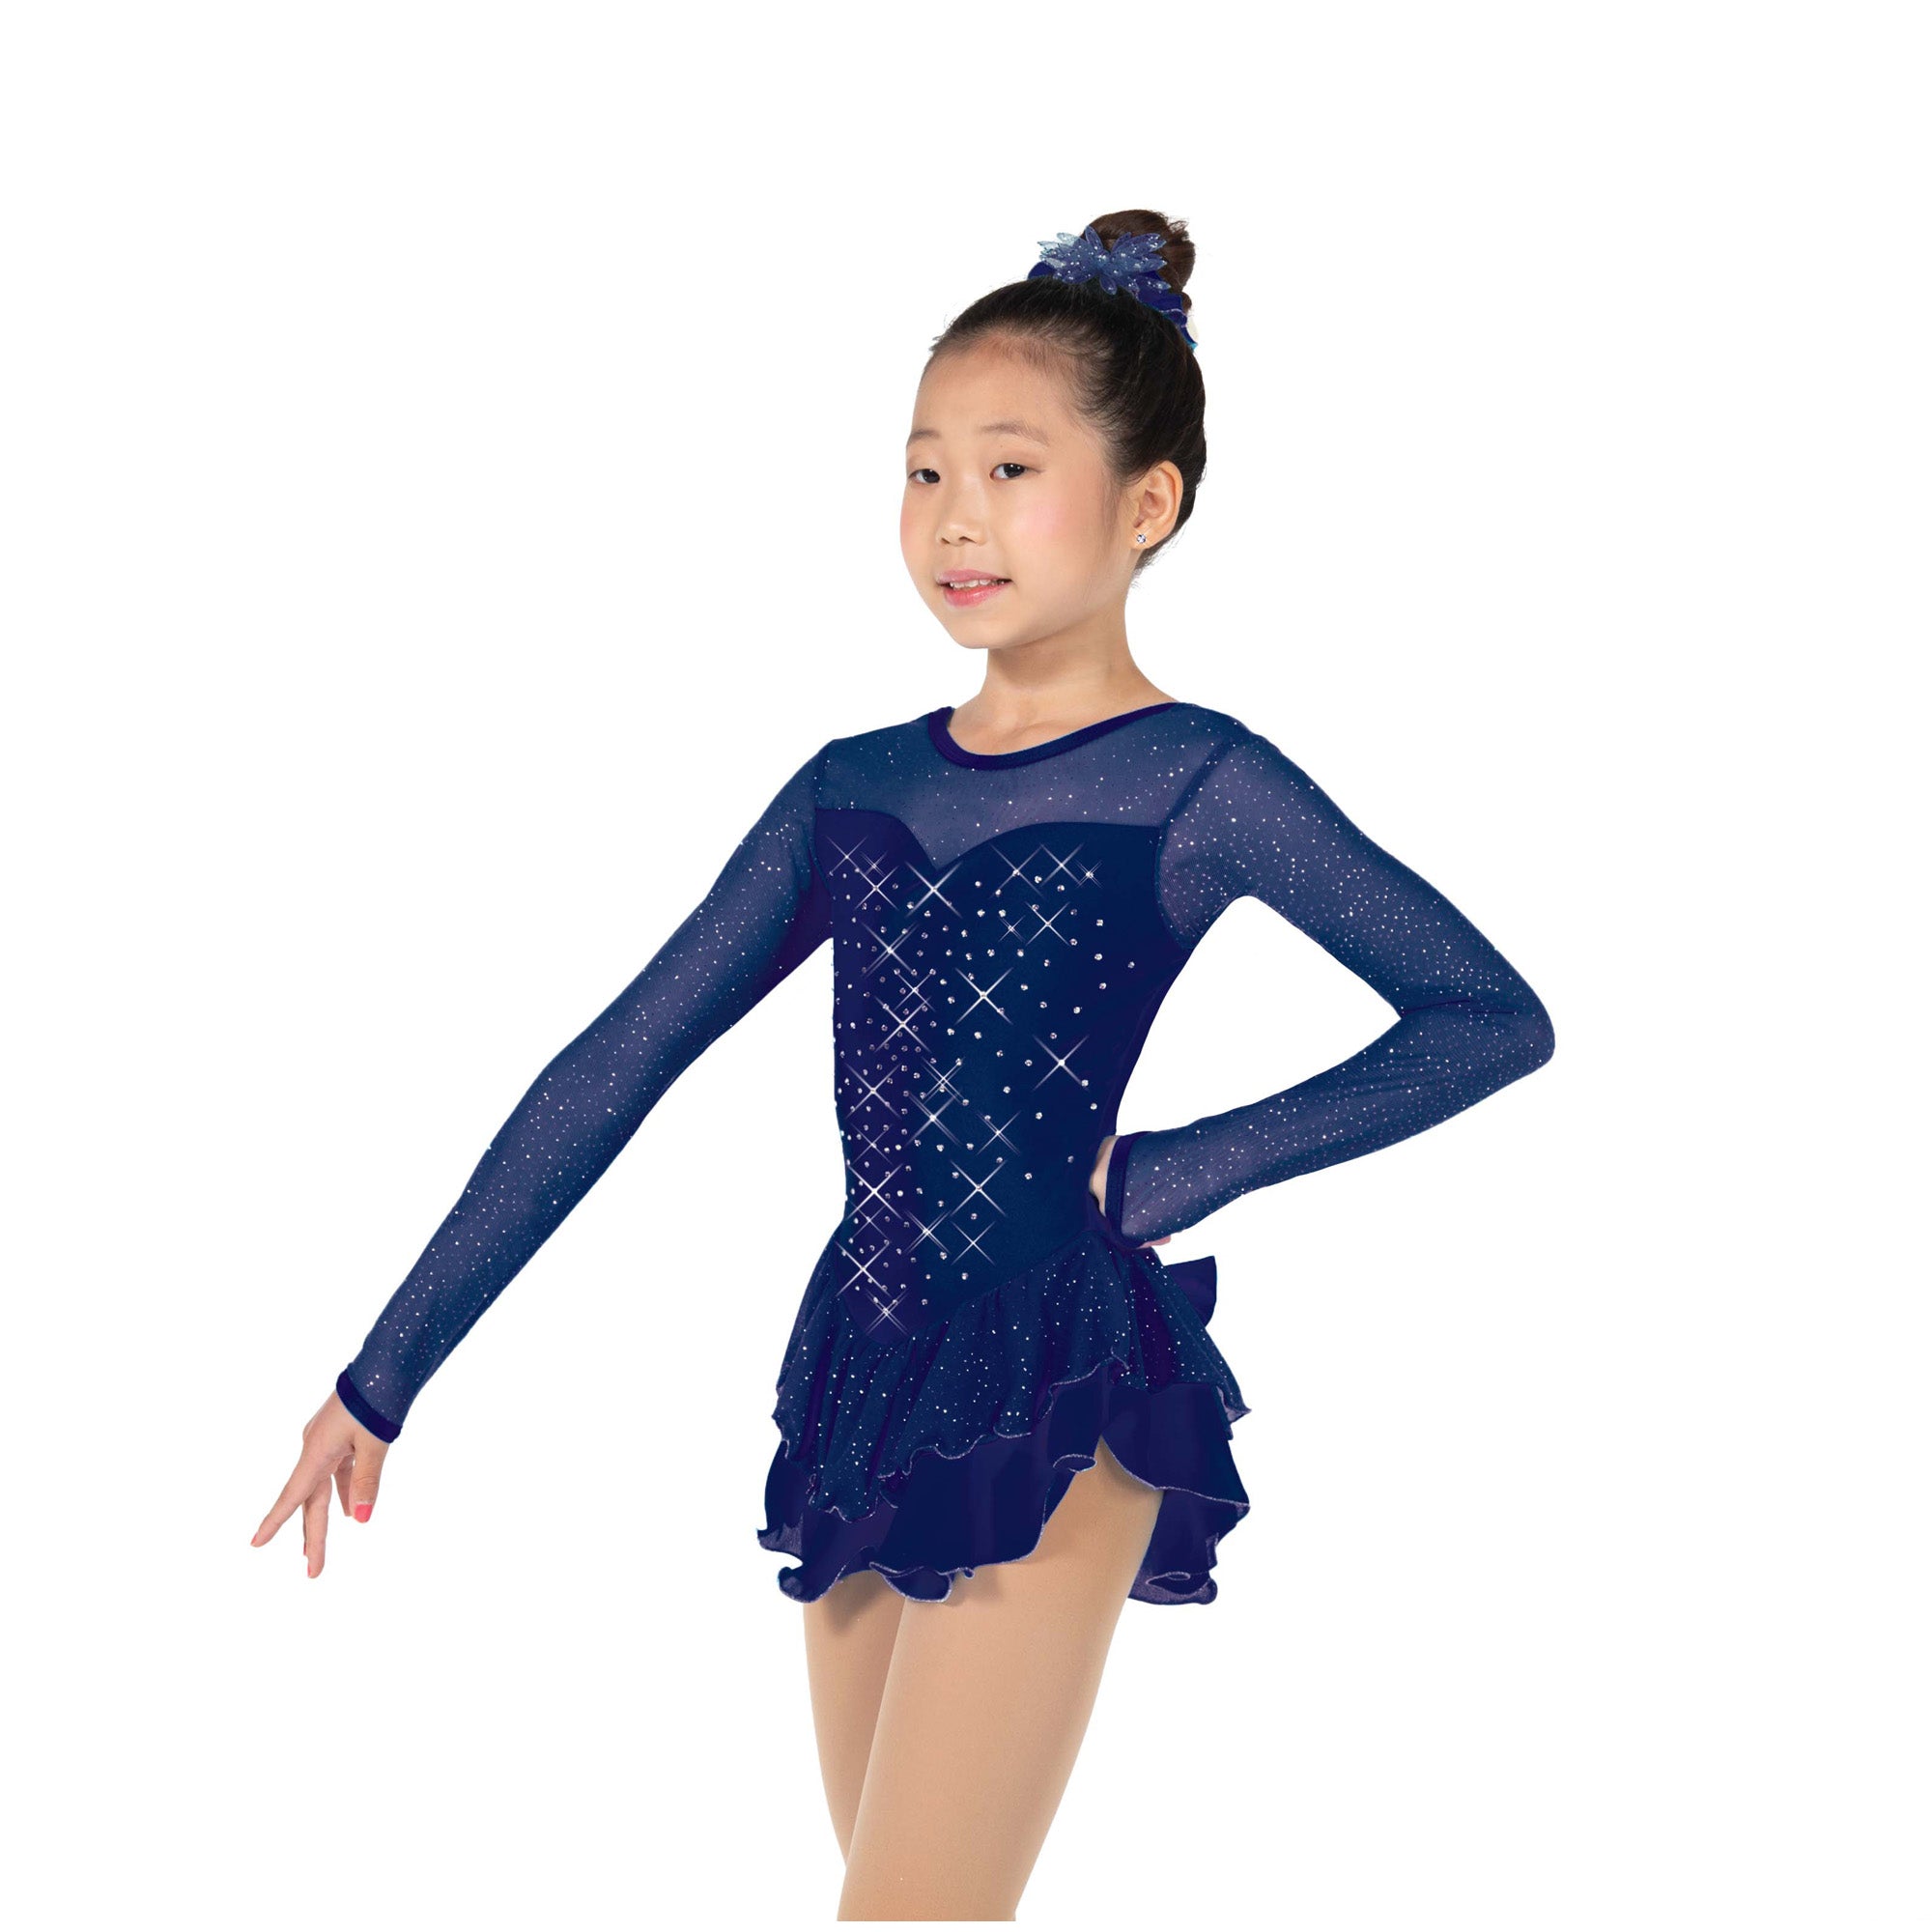 154 Crystal Kisses Skating Dress in Navy Blue by Jerry's